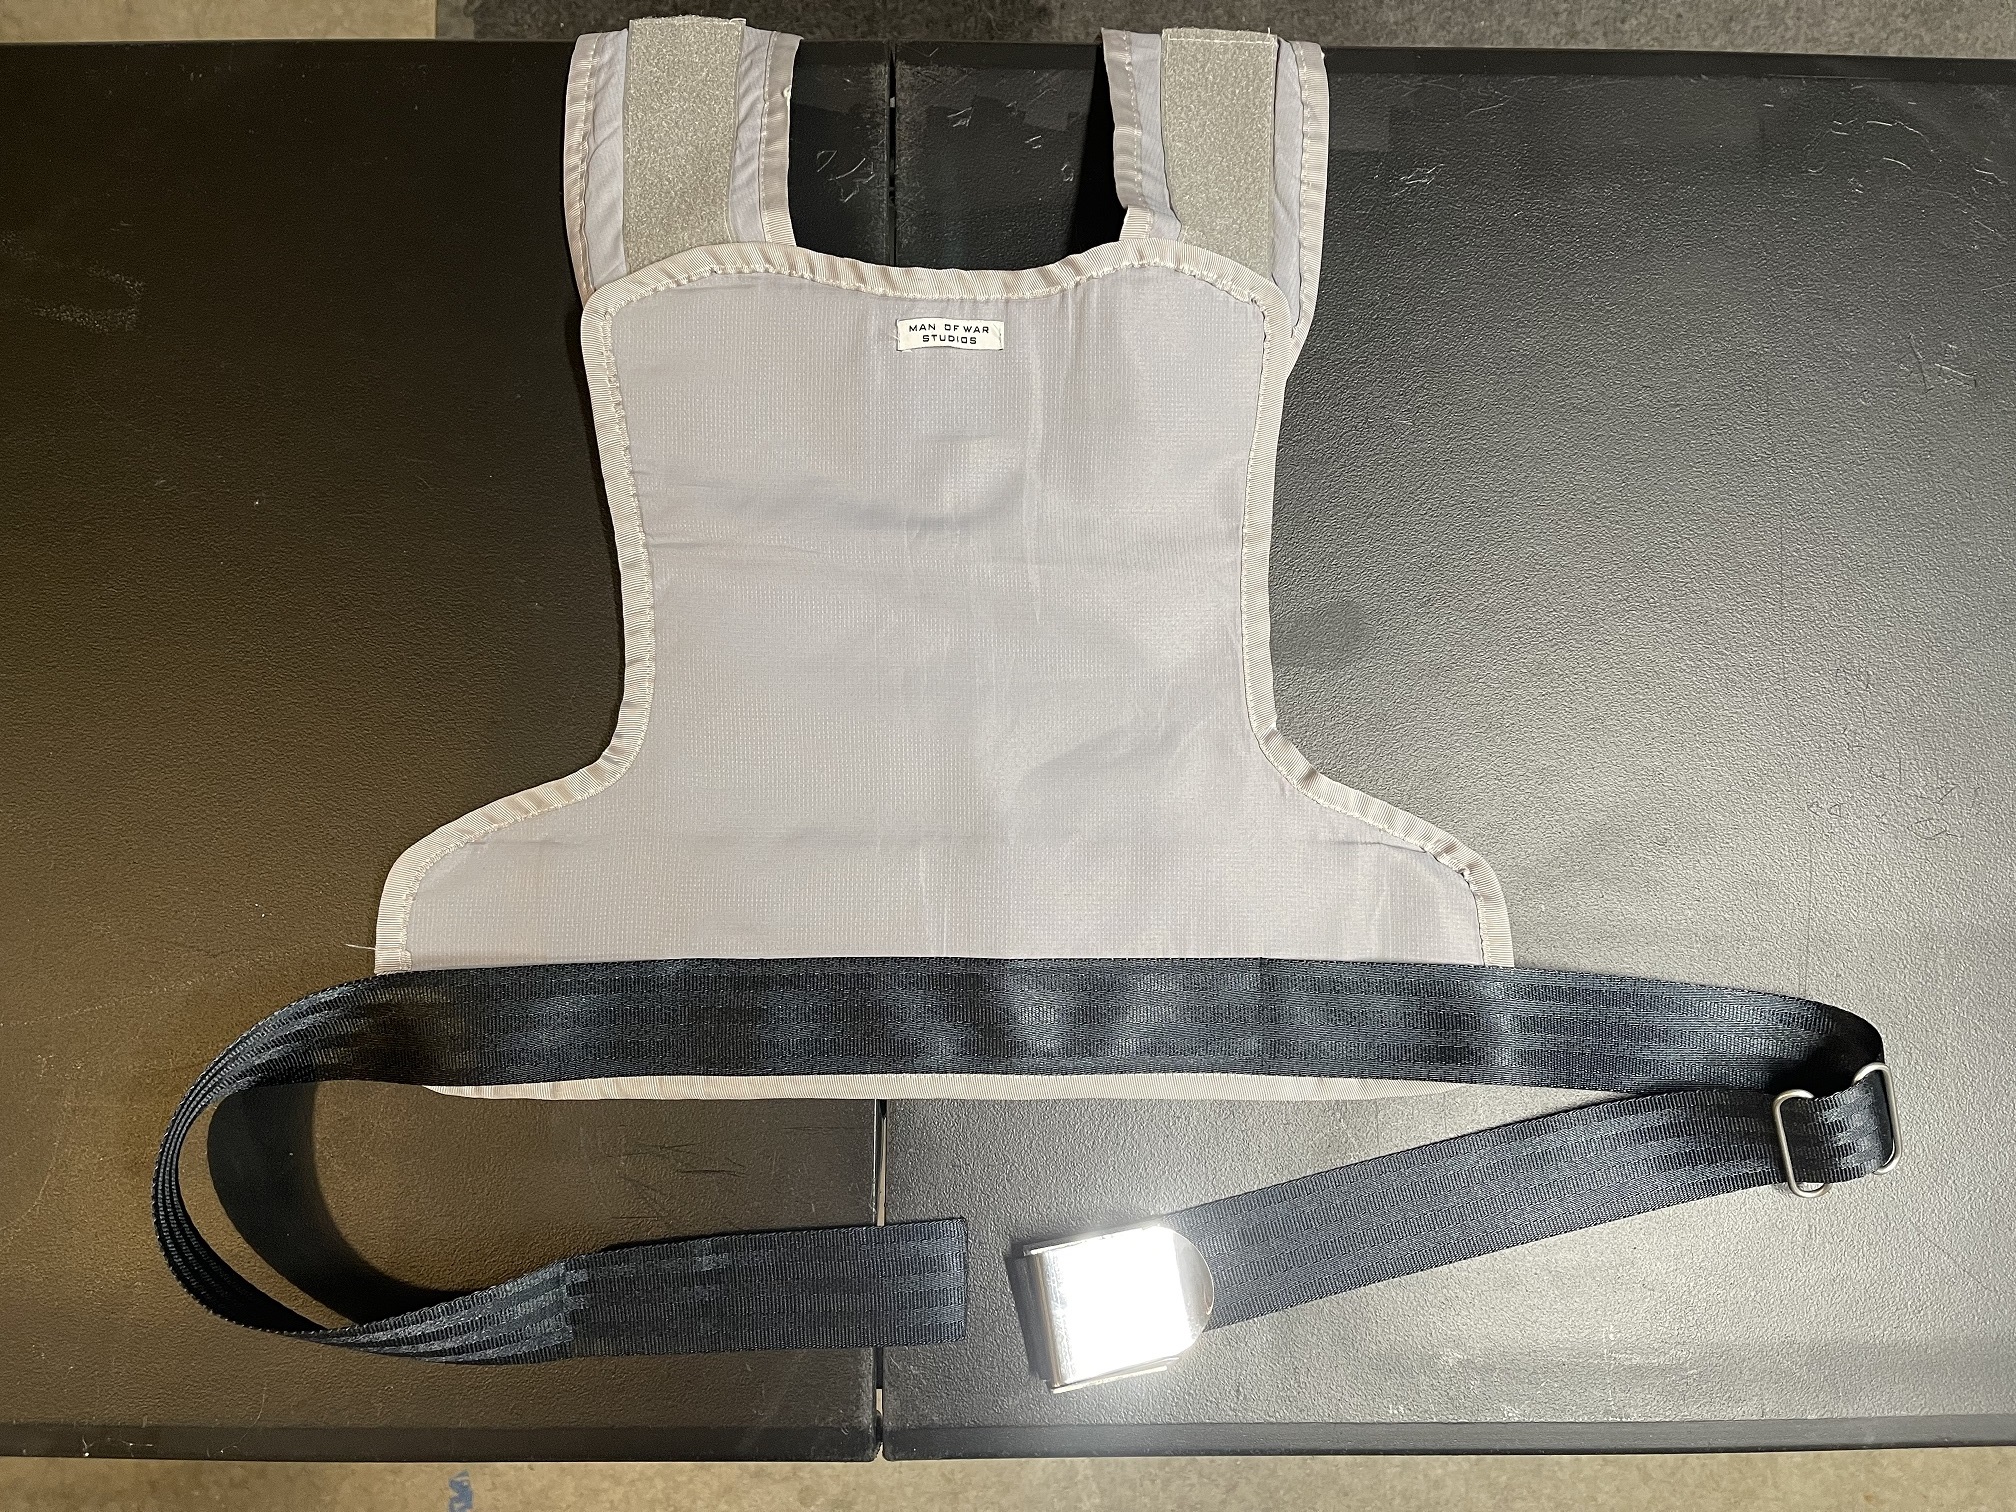 MoW Studios Jetpack Harness with Seatbelt Attached - Pic 1.jpg